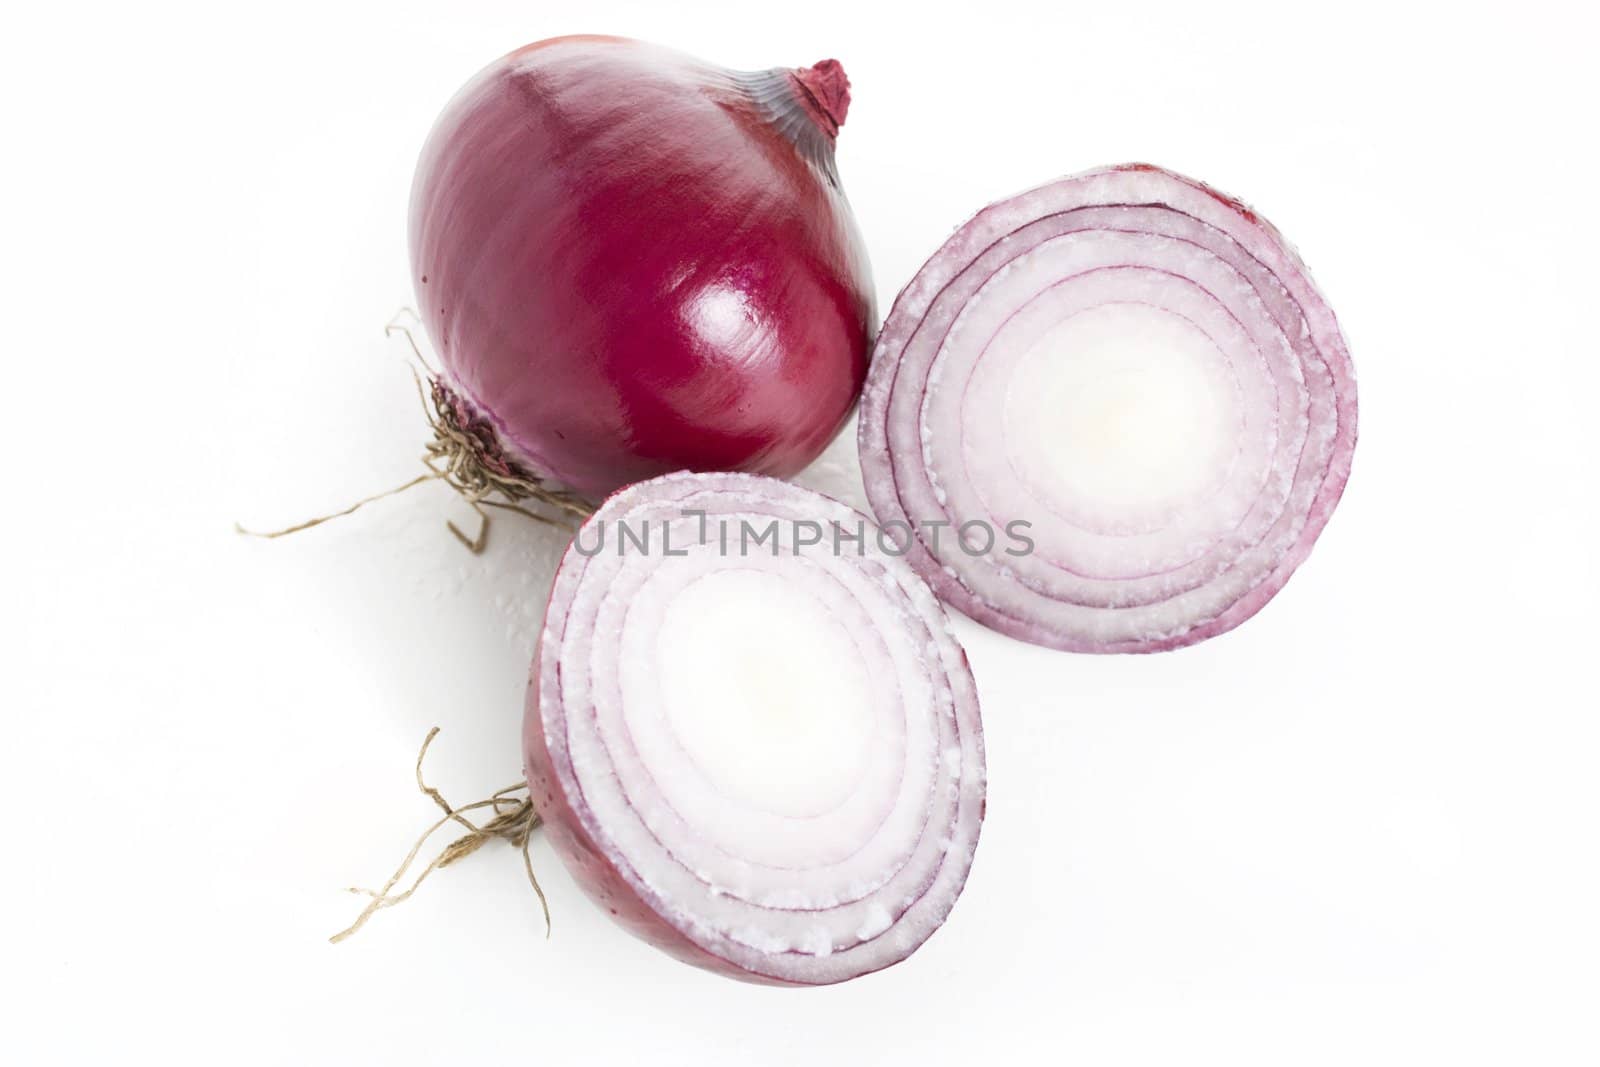 Whole red onion and cut red onion.